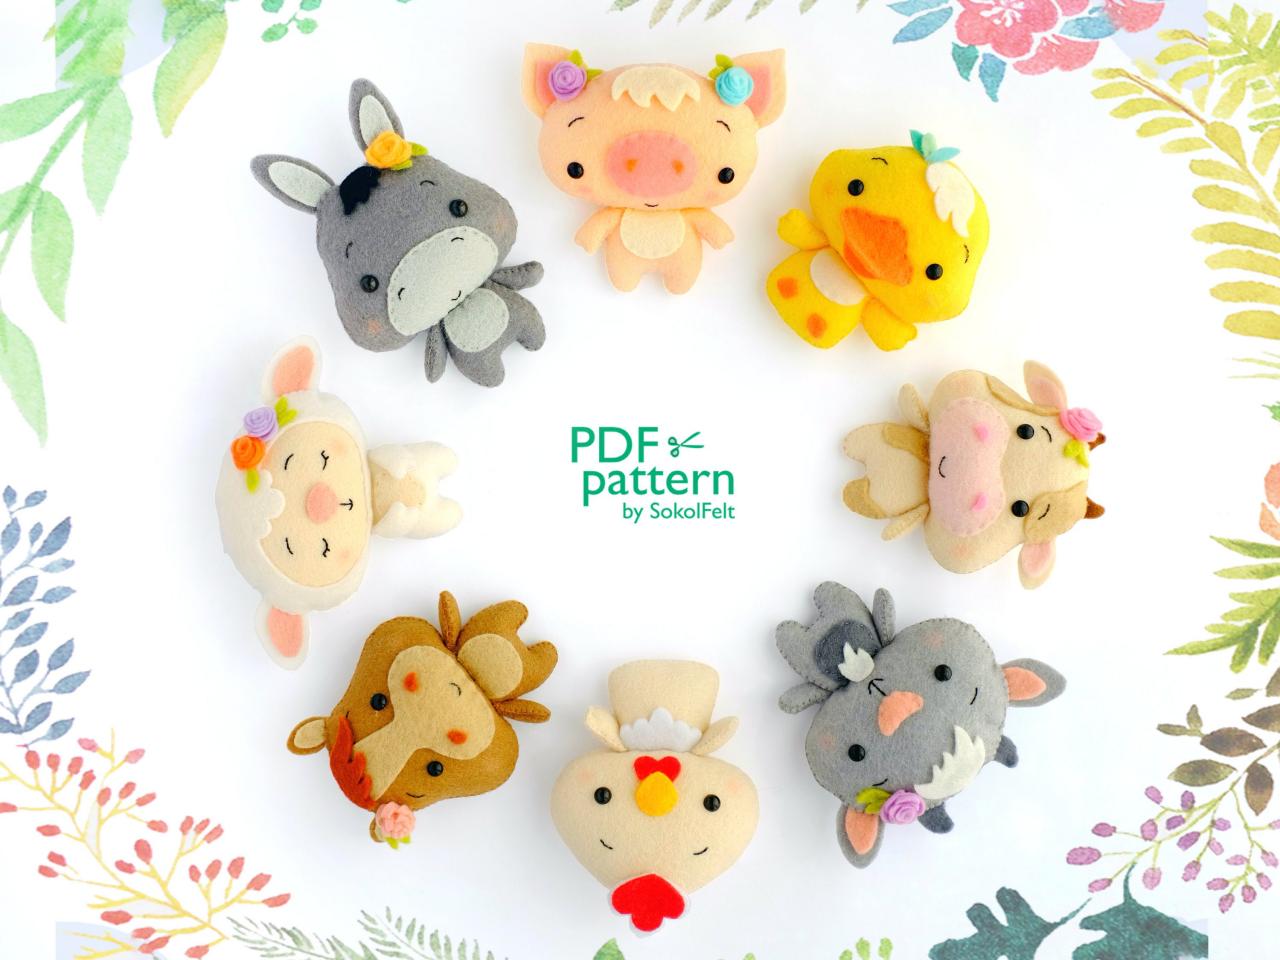 Set of 8 felt farm animal toys sewing PDF and SVG patterns, Chick, Goat, Duck, Horse, Pig, Cow, Donkey and Lamb, baby crib mobile toy